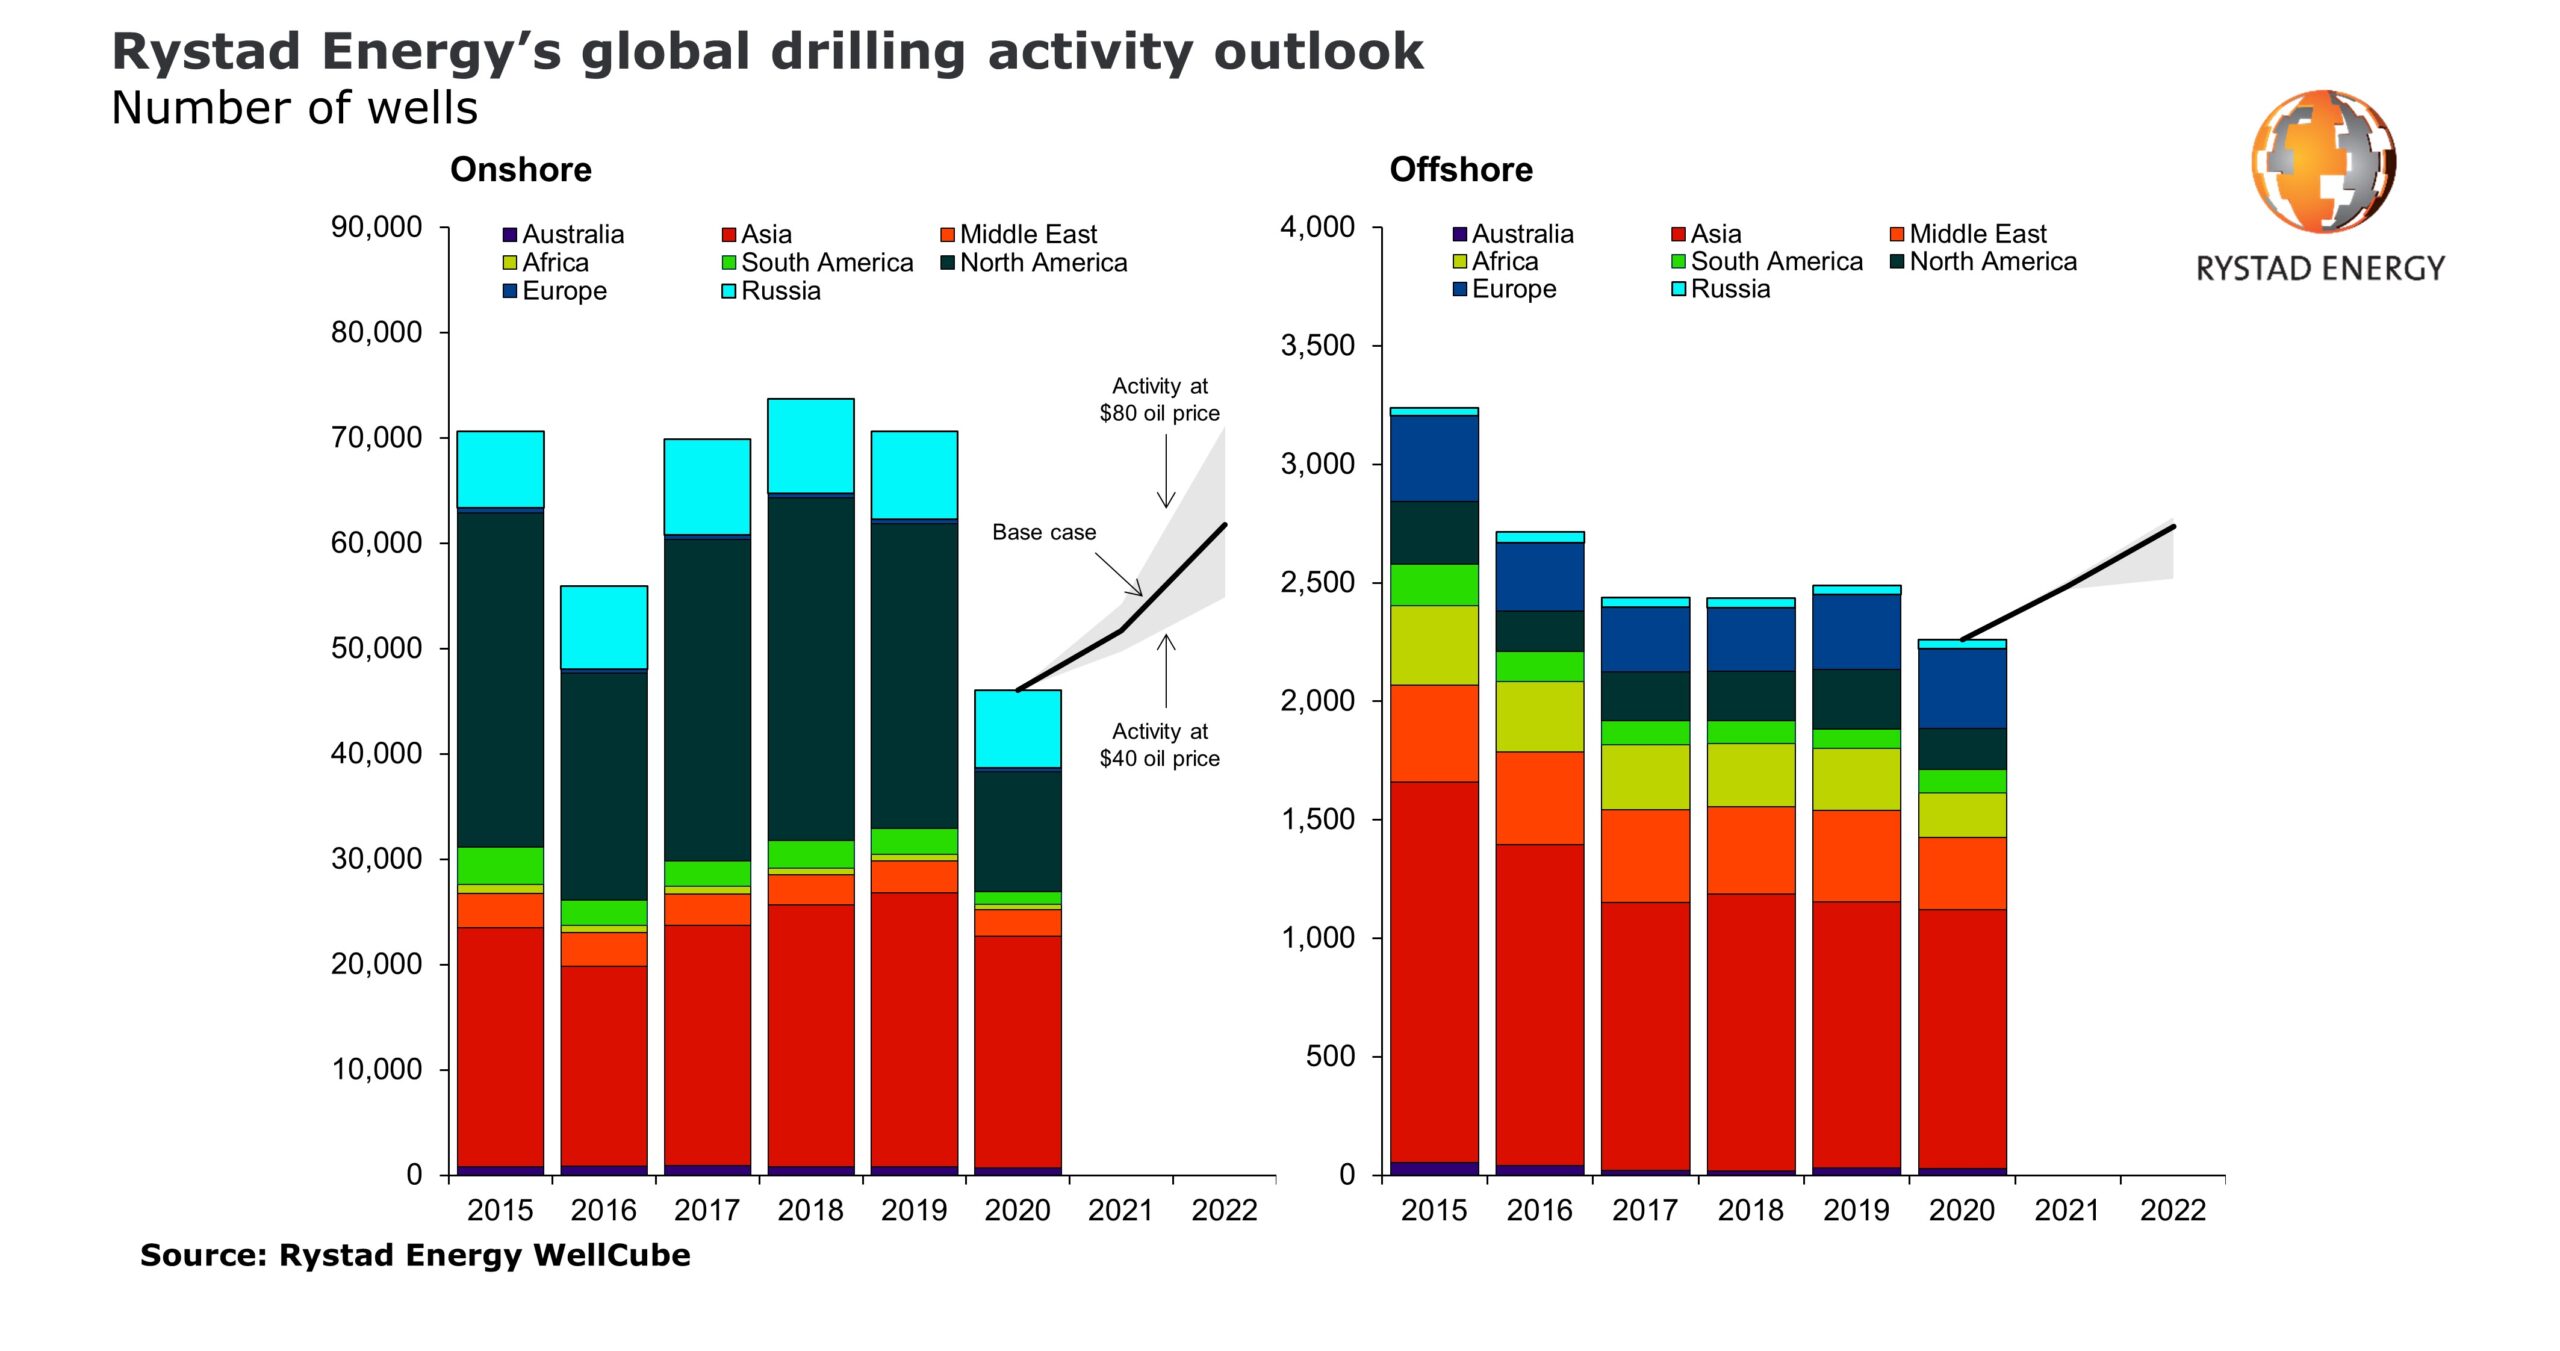 Two consecutive years of growth expected for drilling activity